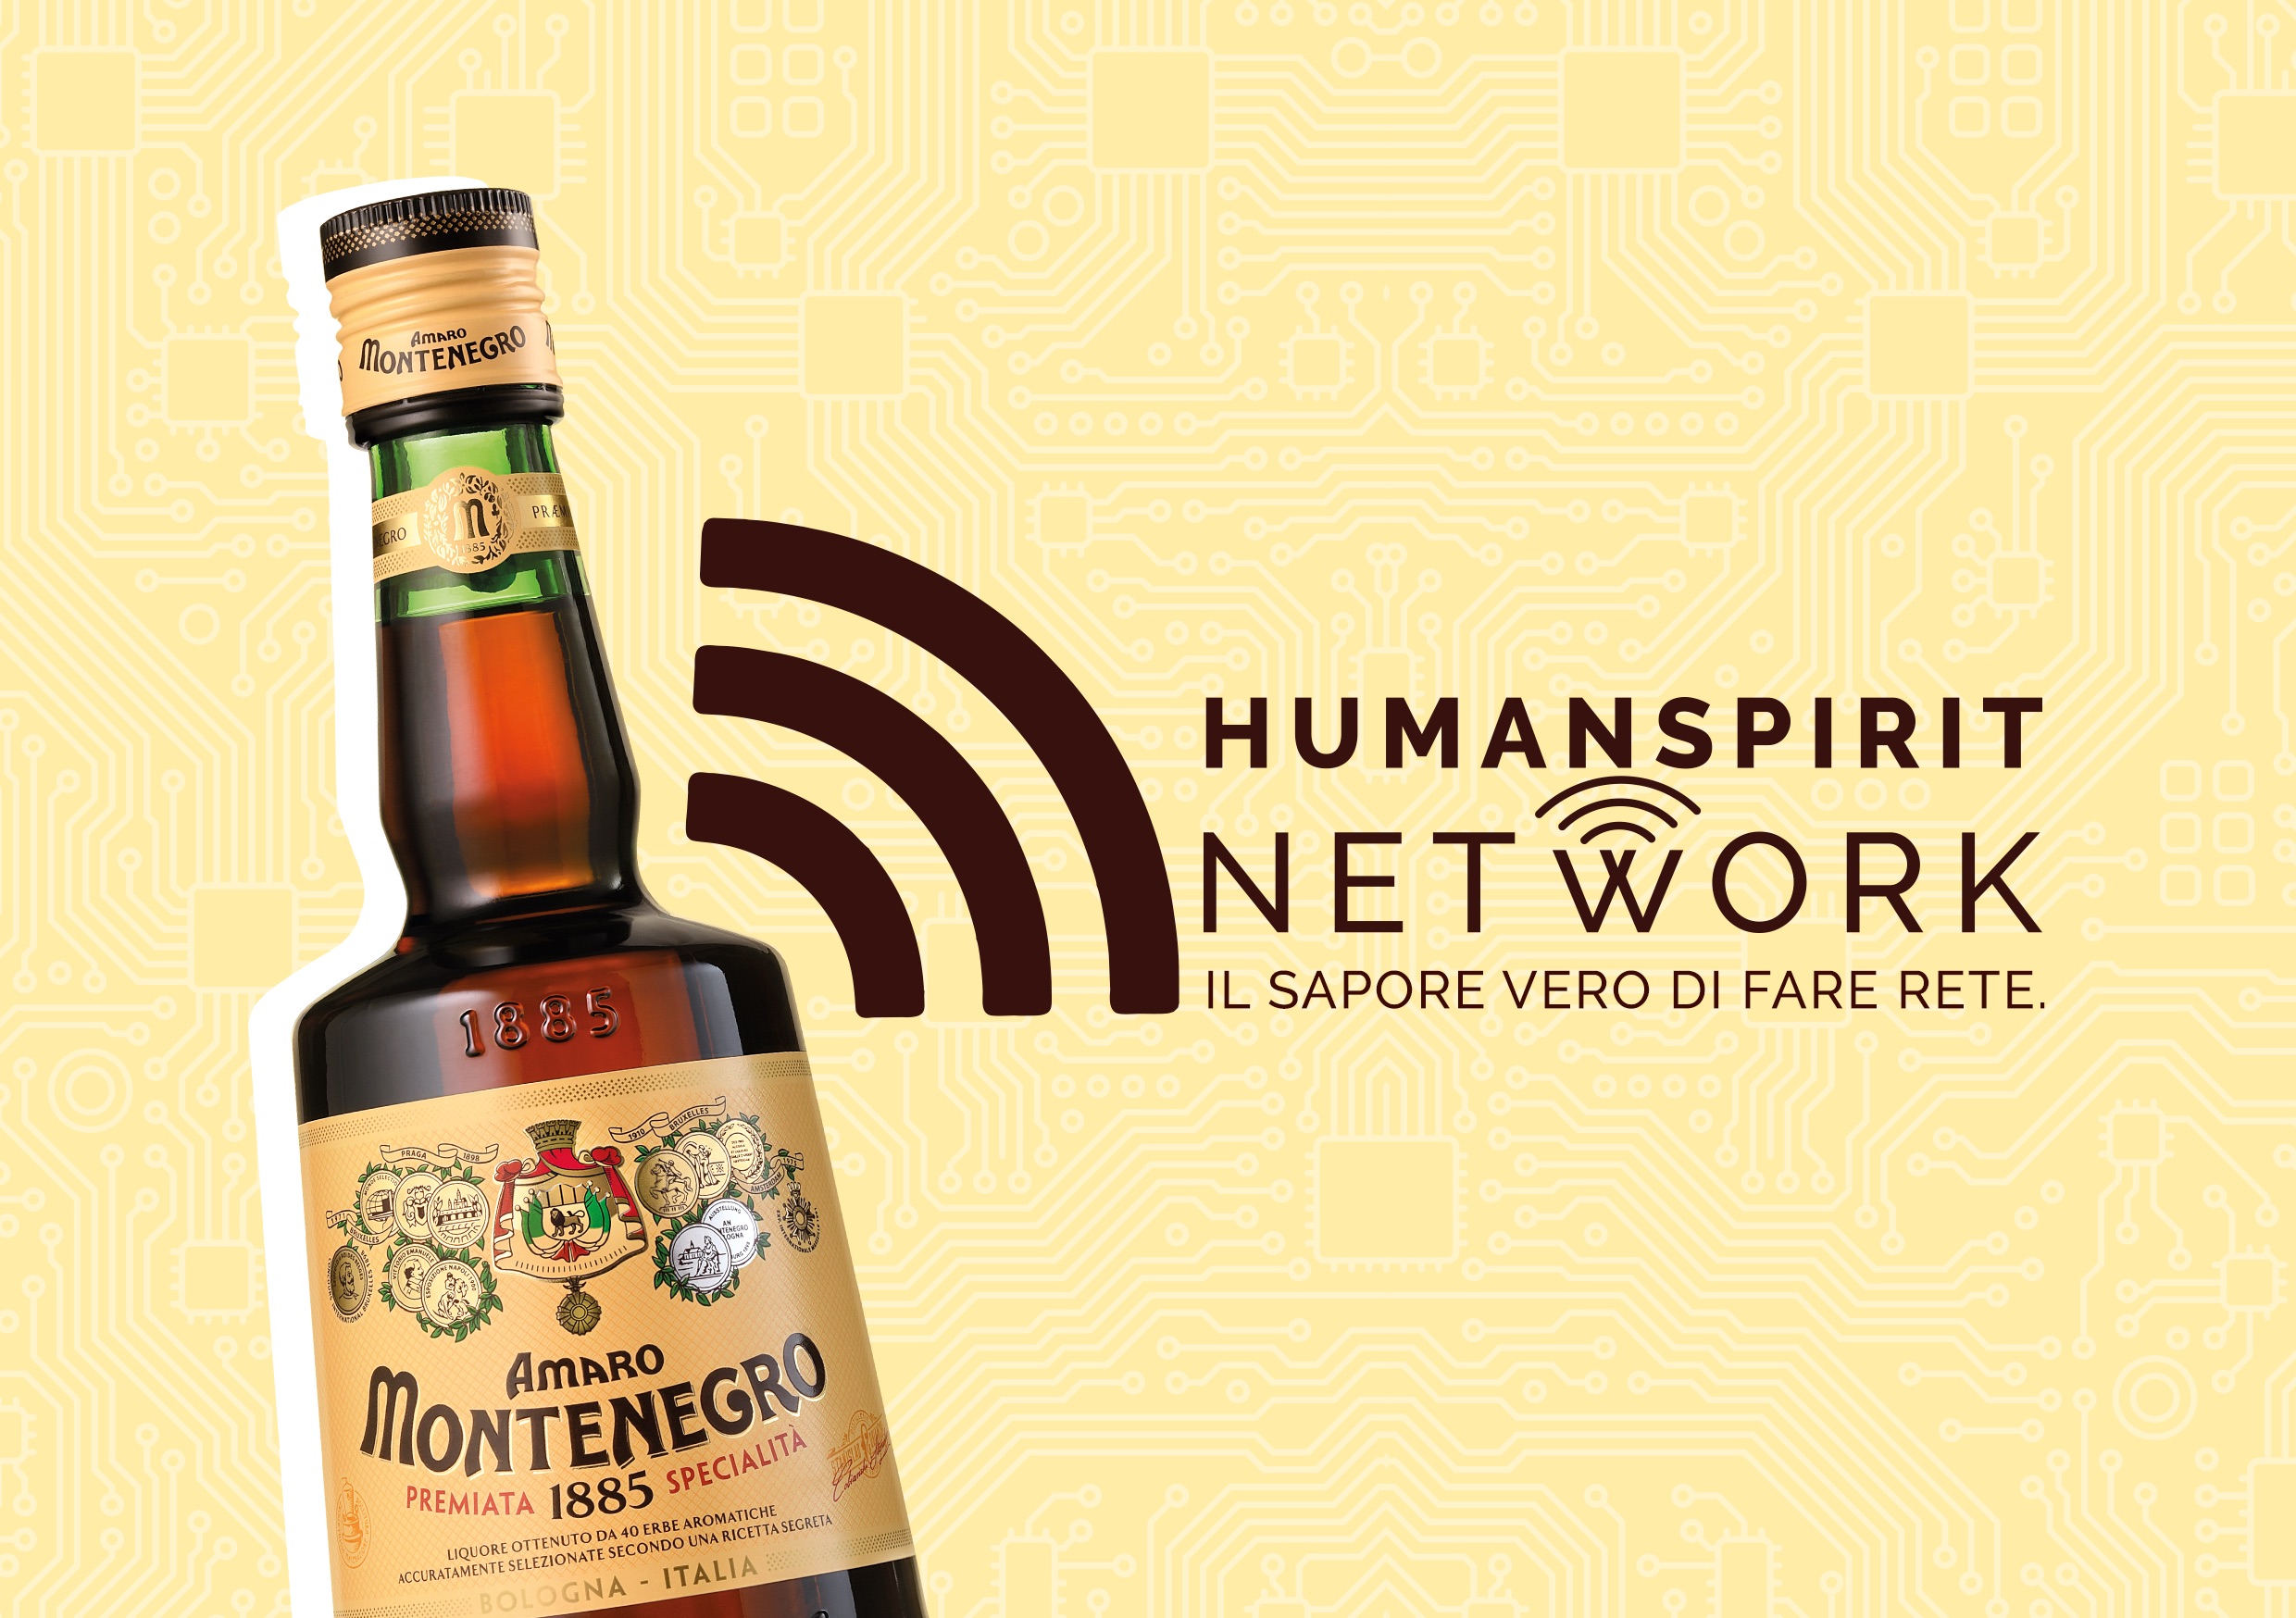 THE #HUMANSPIRIT NETWORK FROM AMARO MONTENEGRO  BRINGS ITALY TOGETHER WITH ARMANDO TESTA